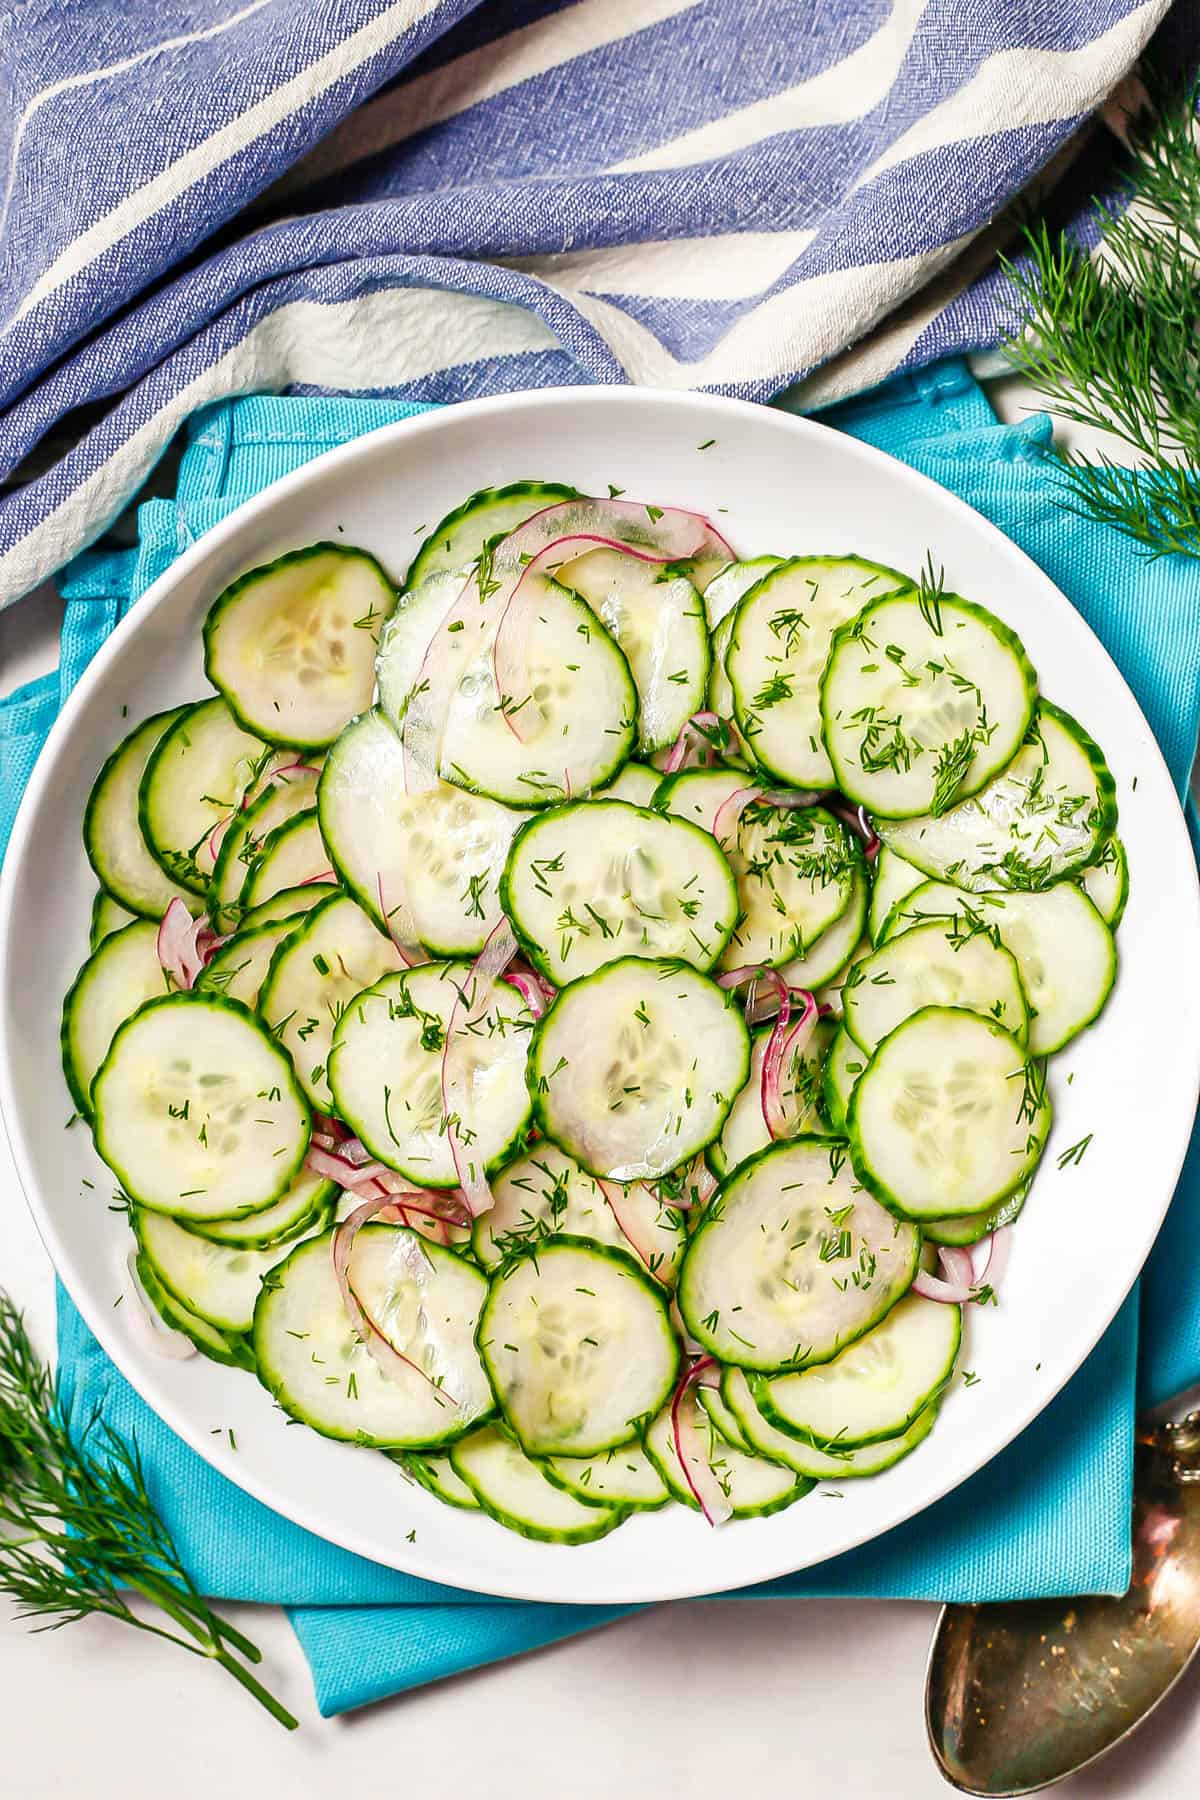 Cucumber salad with fresh dill sprinkled on top served in a low white bowl set on teal napkins.